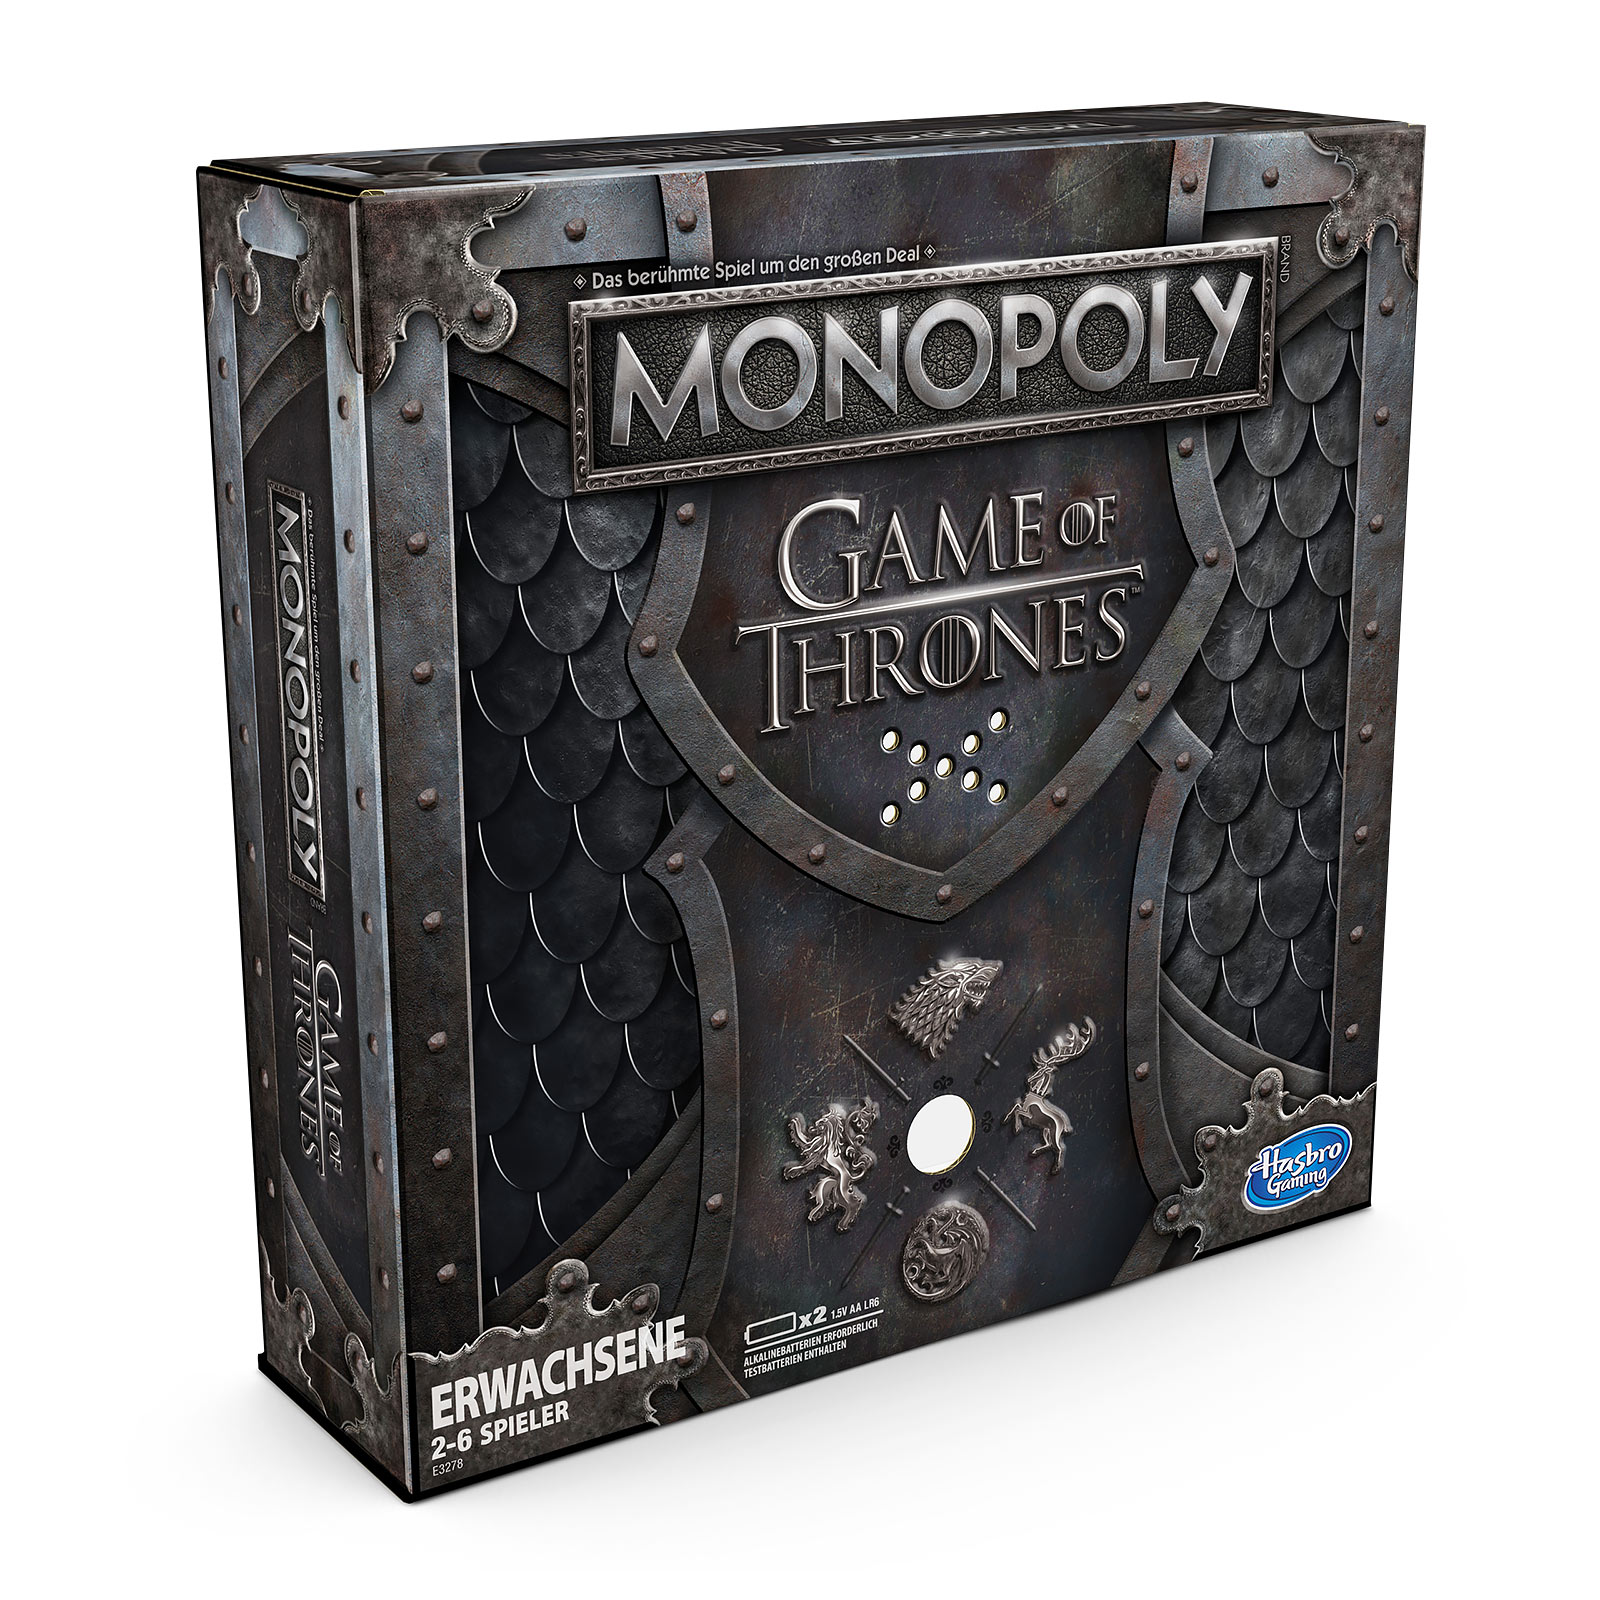 Game of Thrones - Monopoly mit Sound